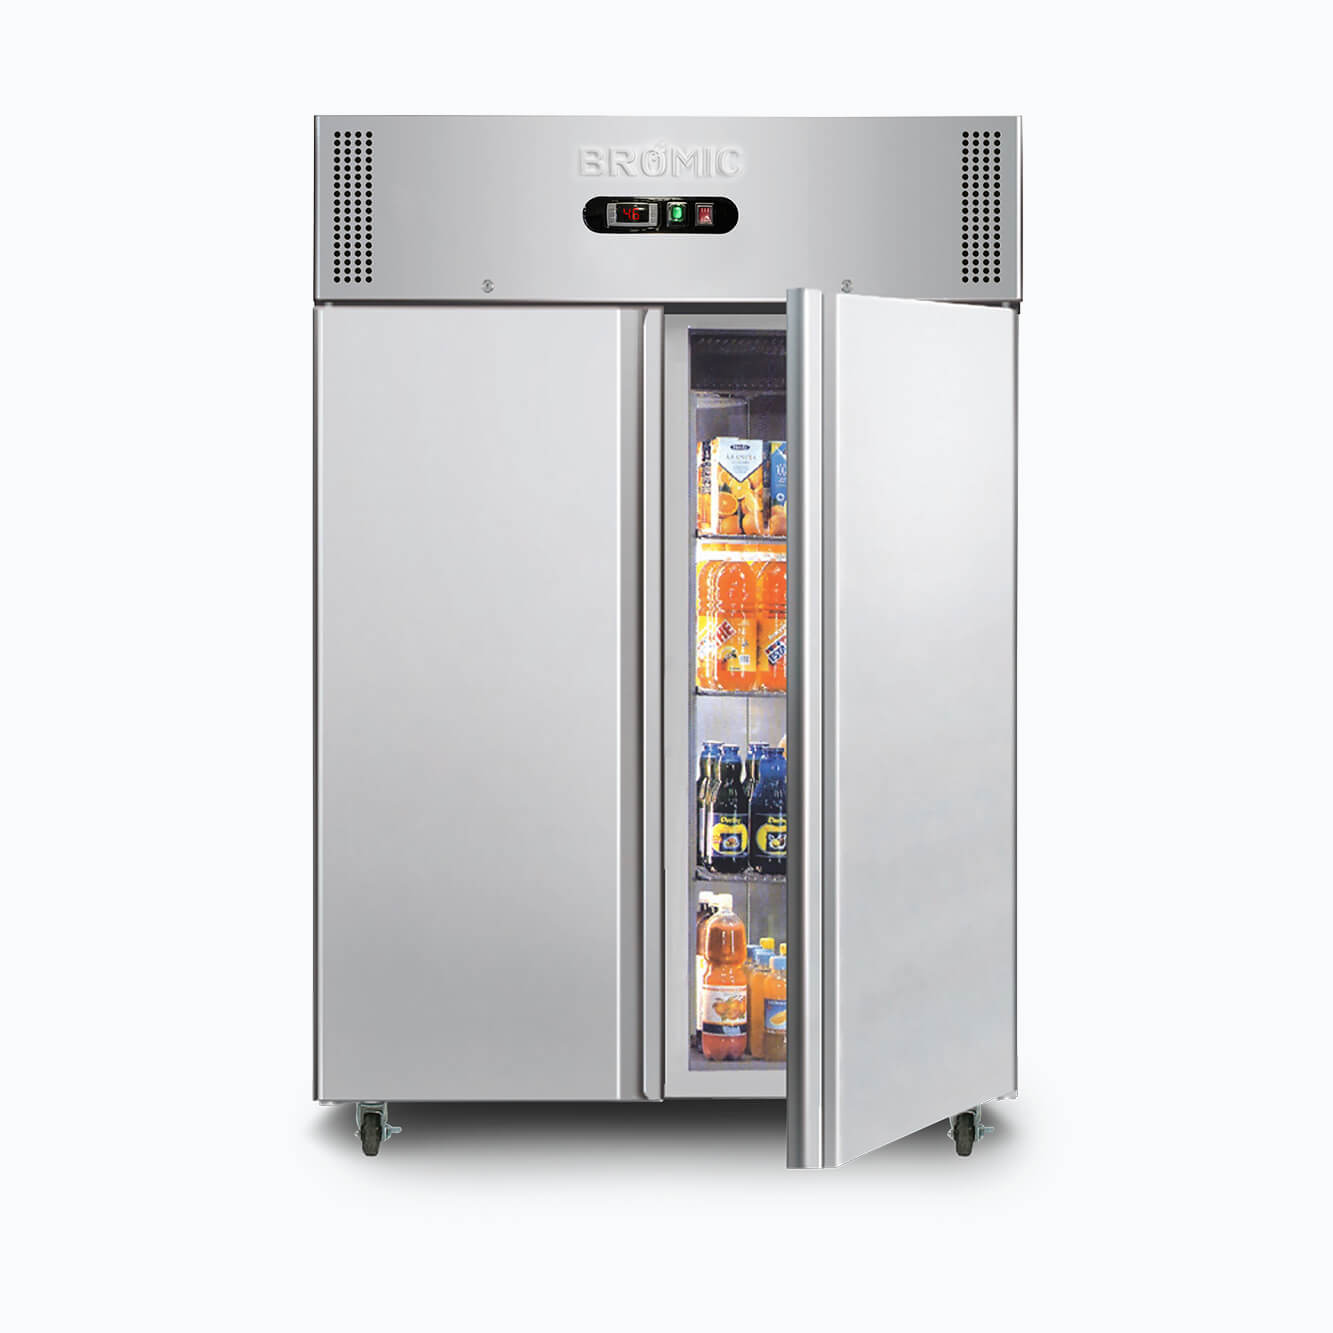 Image of a 1300L stainless steel upright storage freezer with two doors opened with frozen goods inside.